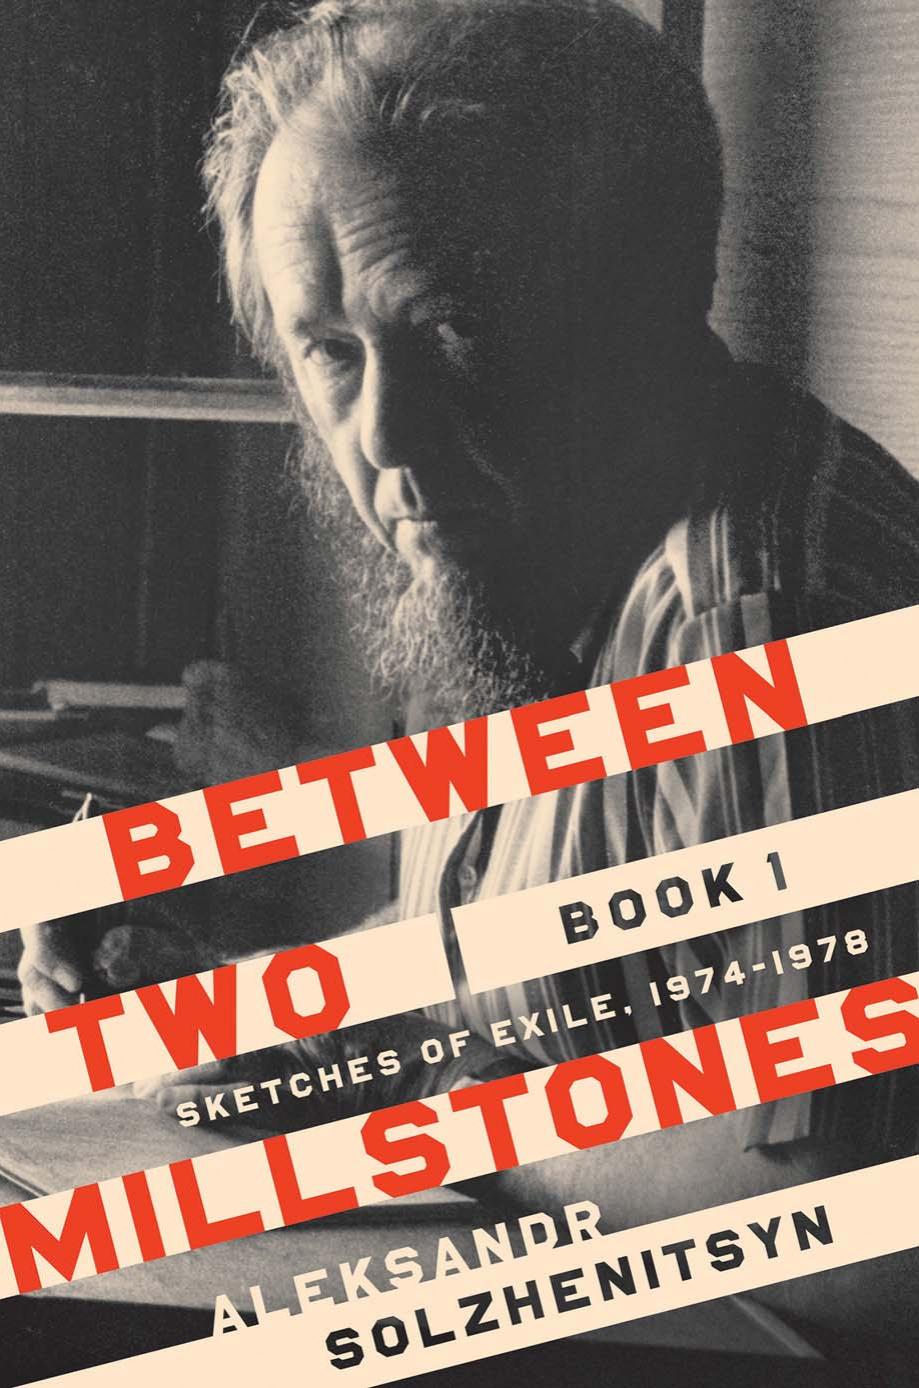 Between Two Millstones, Book 1: Sketches of Exile, 1974–1978 by Aleksandr Solzhenitsyn